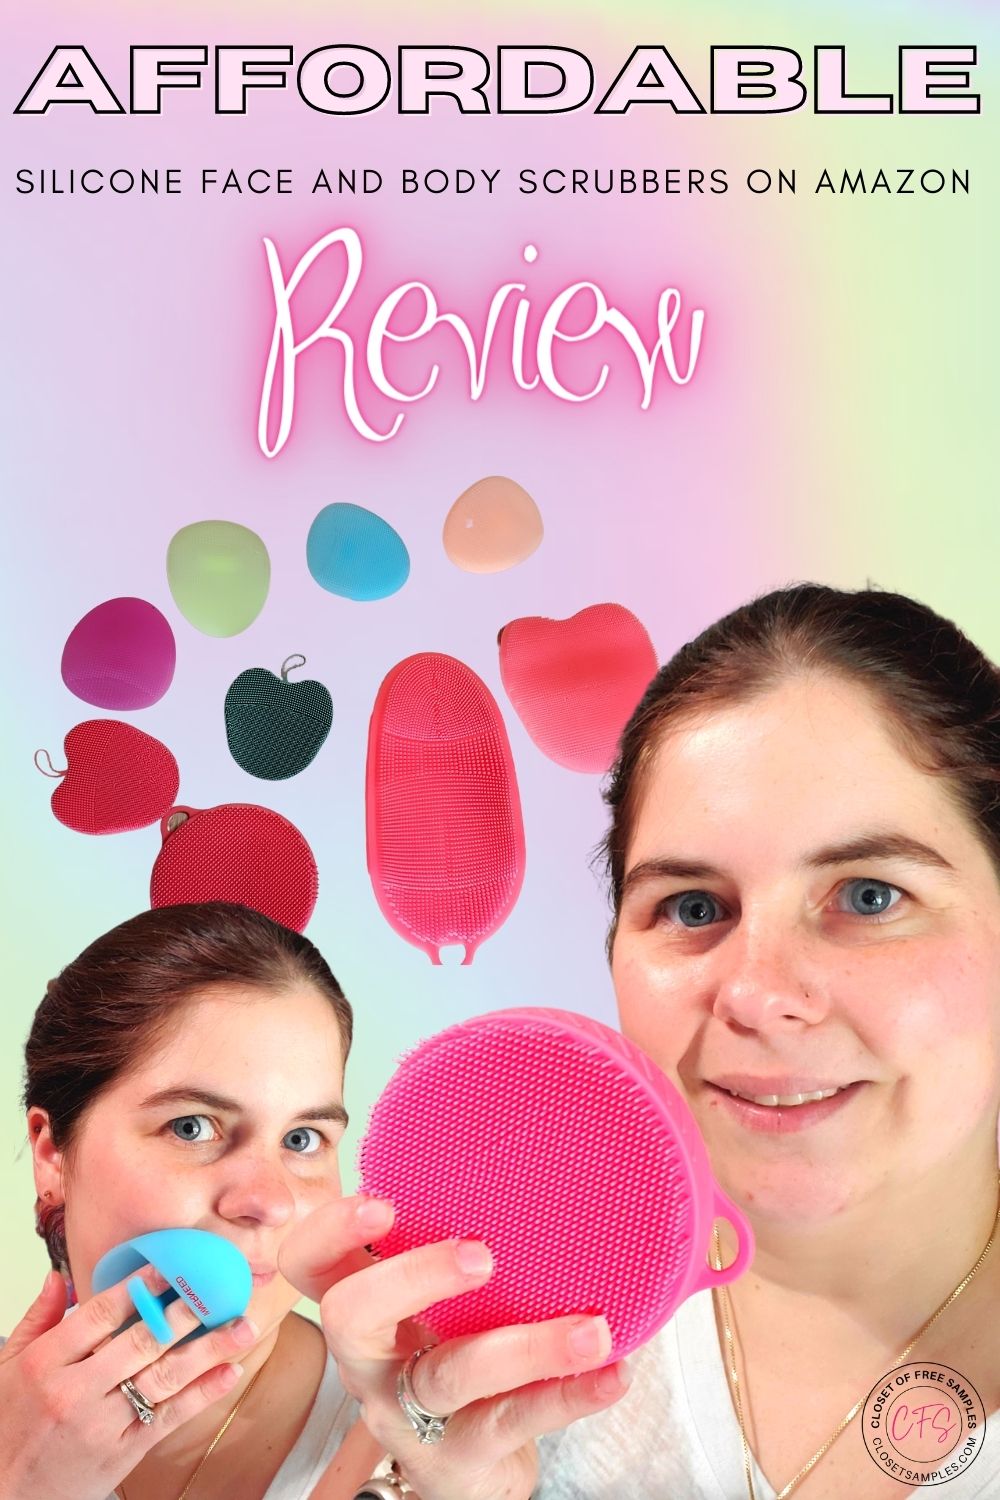 Affordable Silicone Face and Body Scrubbers on Amazon Review closetsamples Pinterest